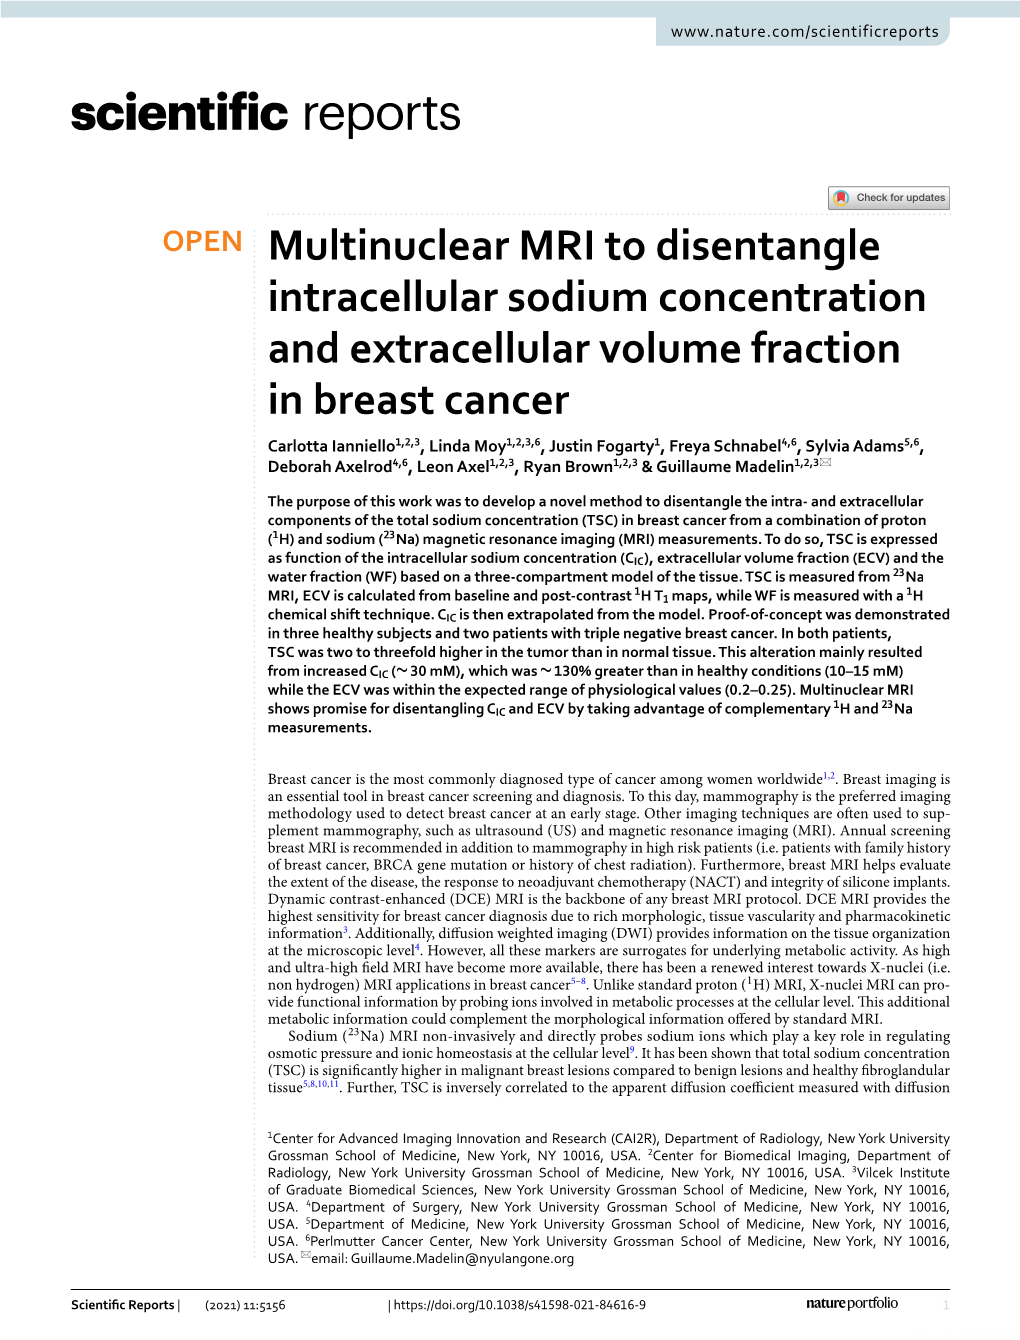 Multinuclear MRI to Disentangle Intracellular Sodium Concentration and Extracellular Volume Fraction in Breast Cancer